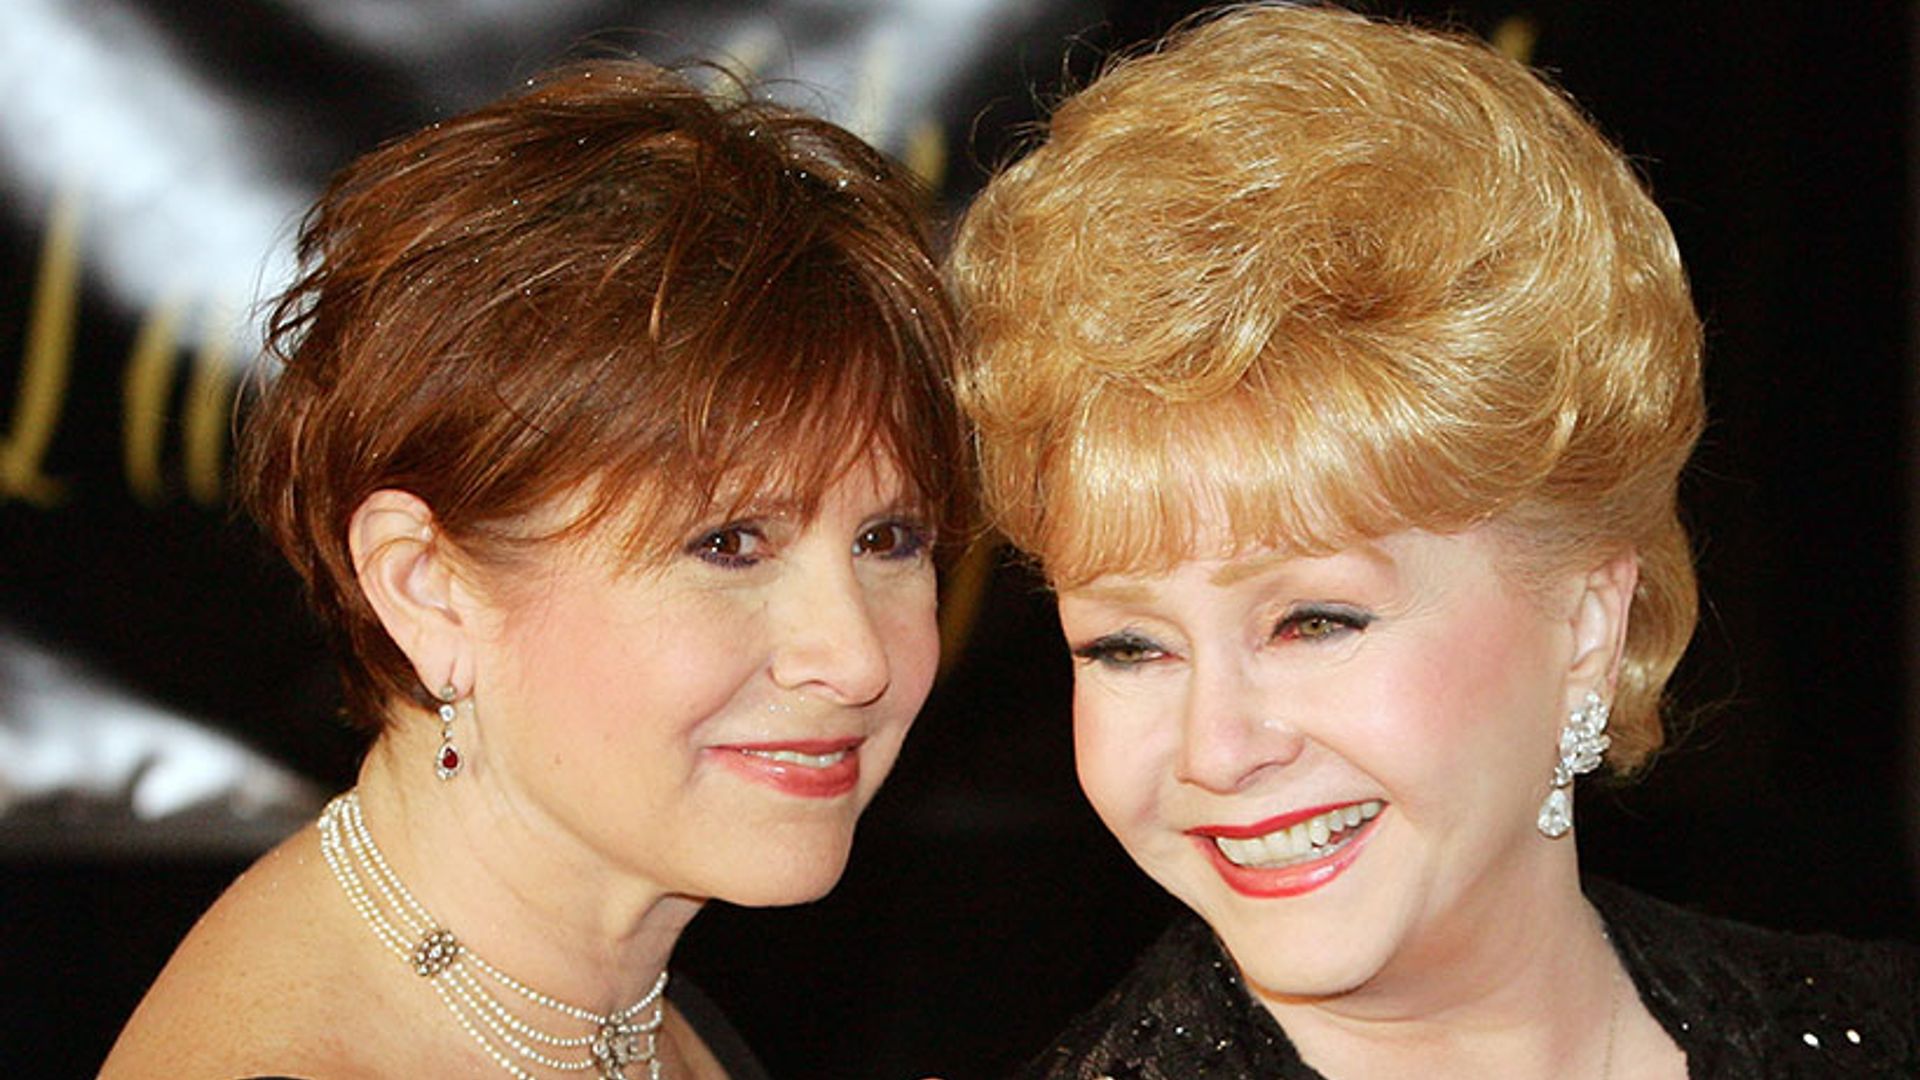 New details of Carrie Fisher and Debbie Reynolds' memorial released